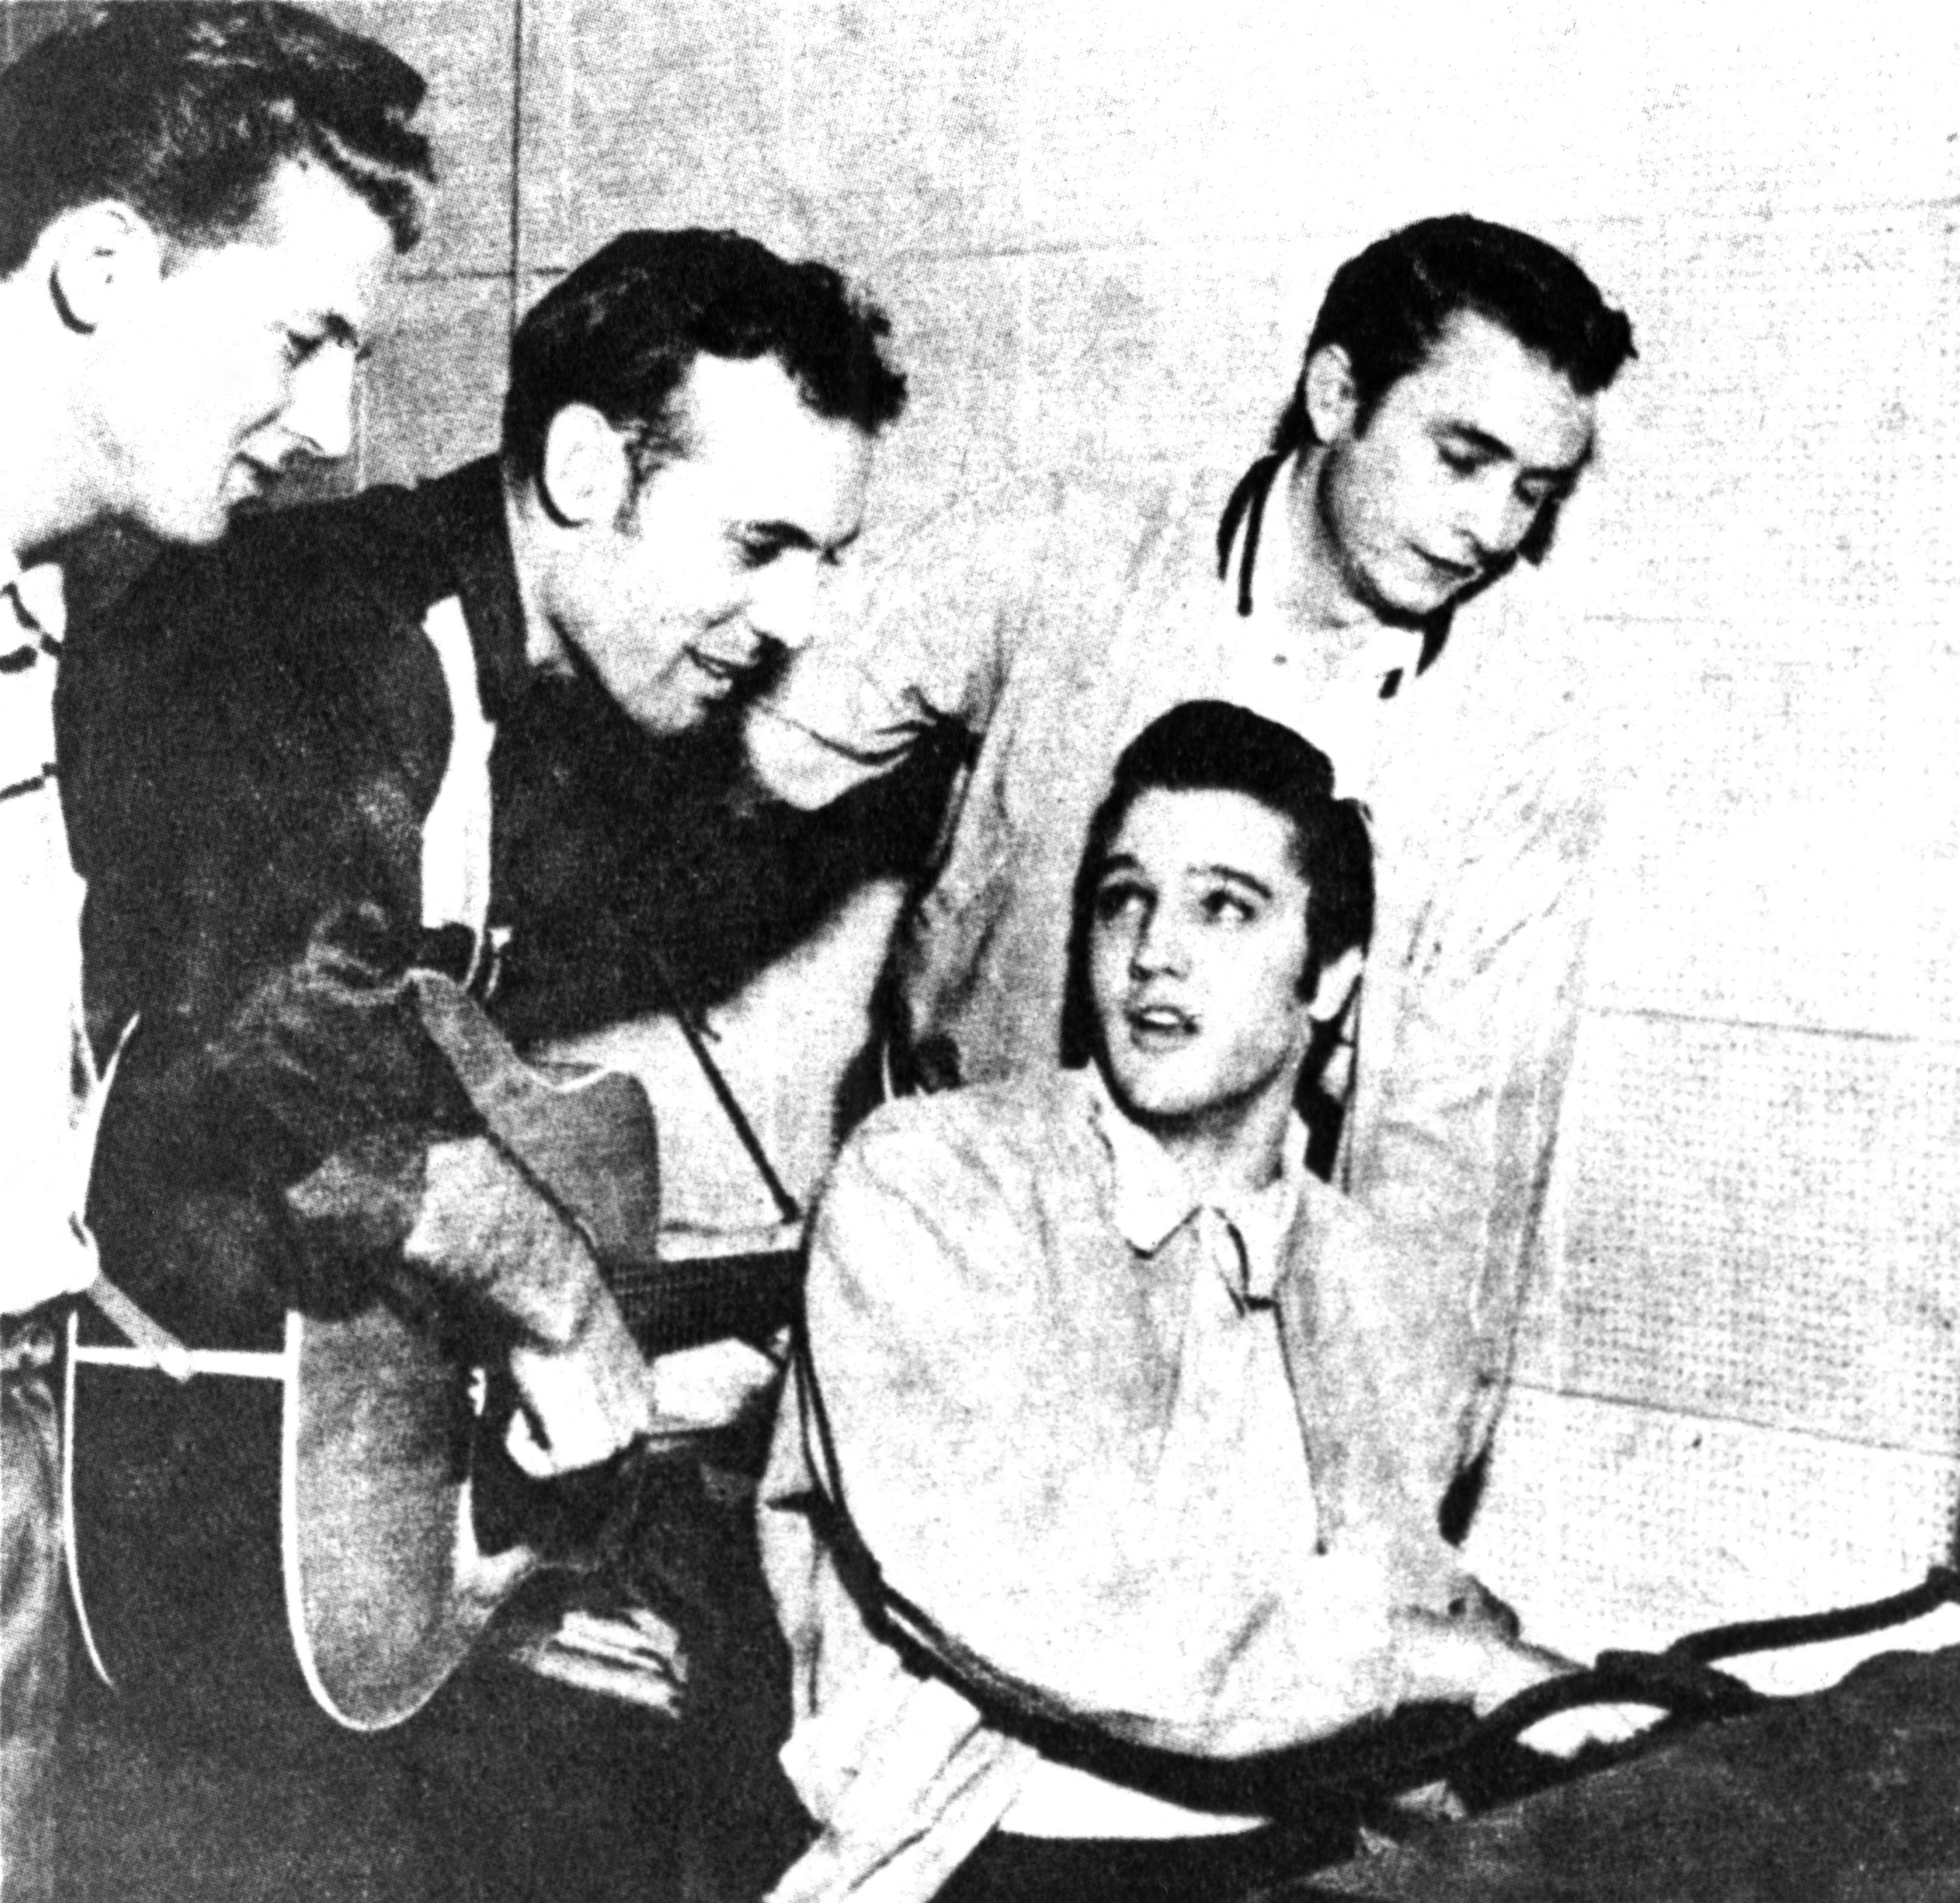 Jerry Lee Lewis, Carl Perkins, Elvis Presley, and Johnny Cash near a piano